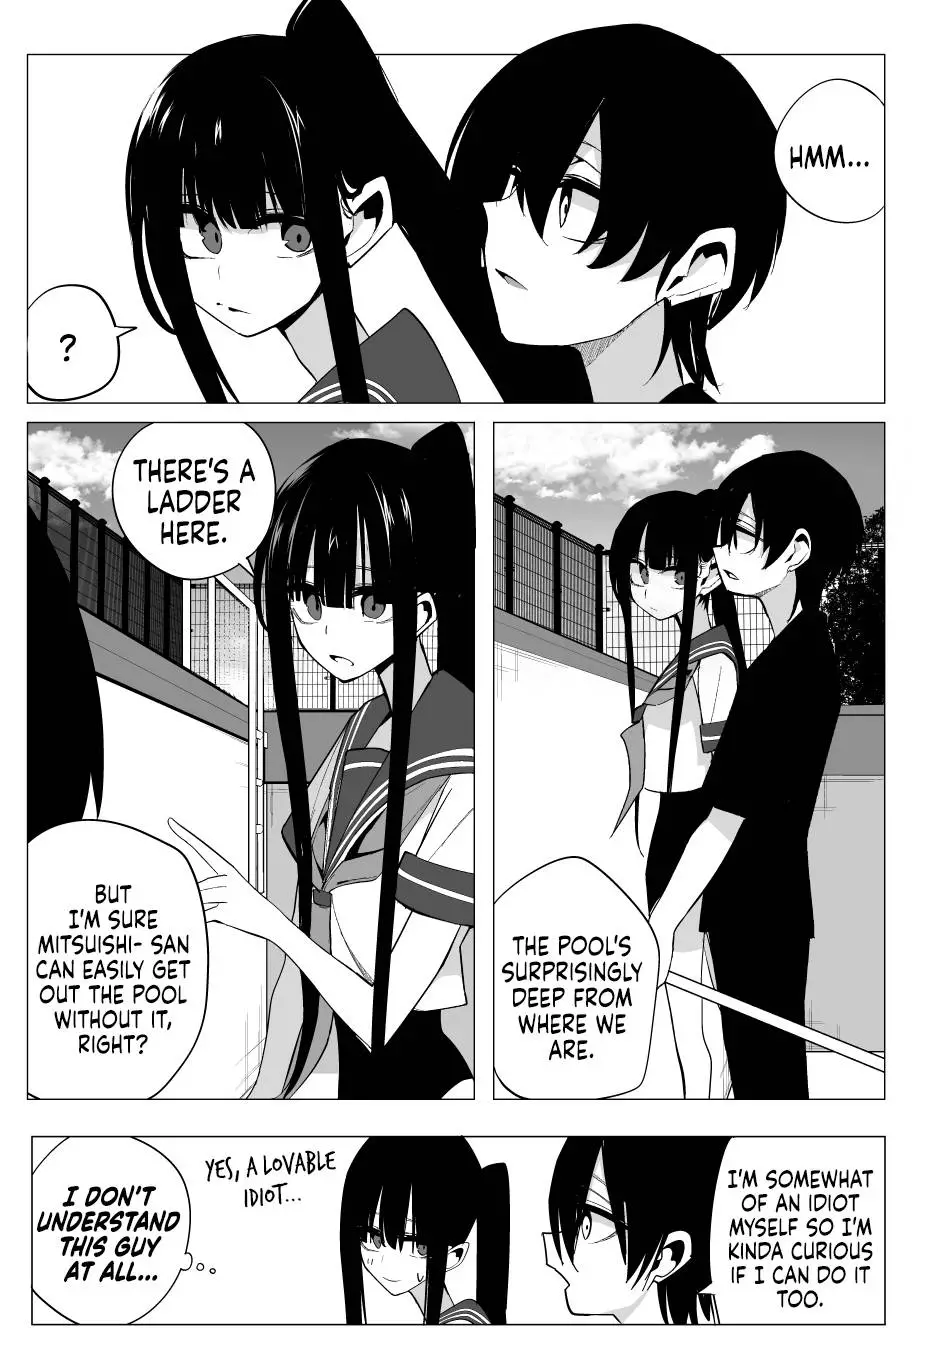 Mitsuishi-San Is Being Weird This Year - 20 page 14-6e79df7f